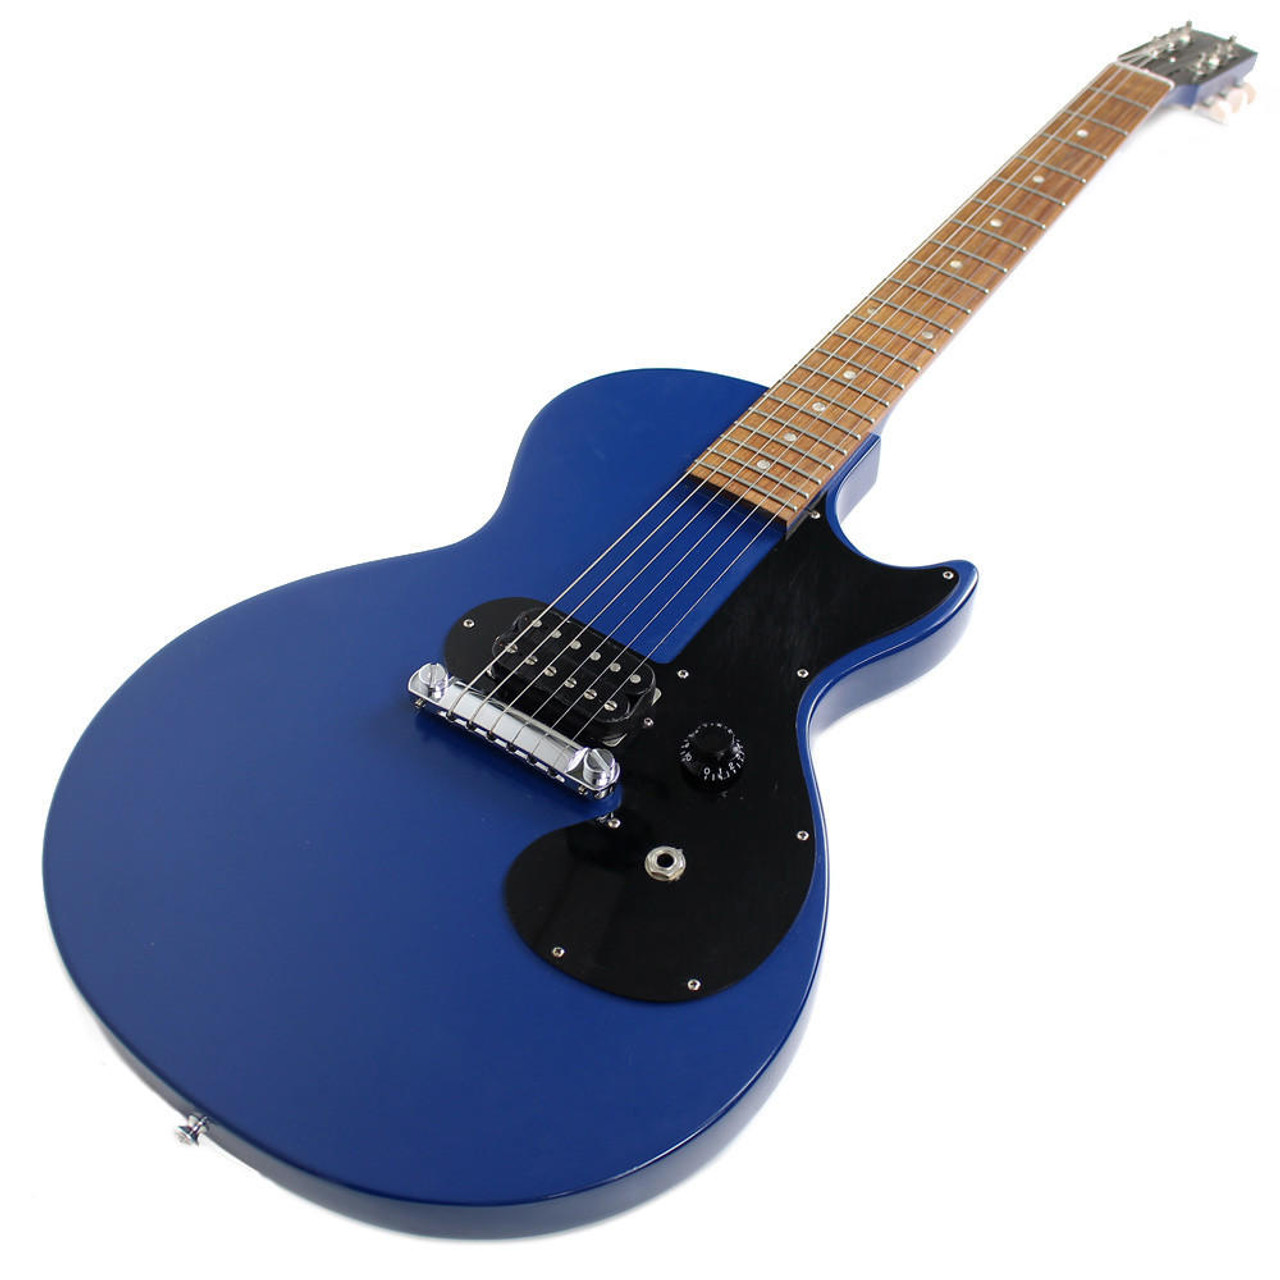 2011 Gibson Melody Maker Les Paul in Satin Blue